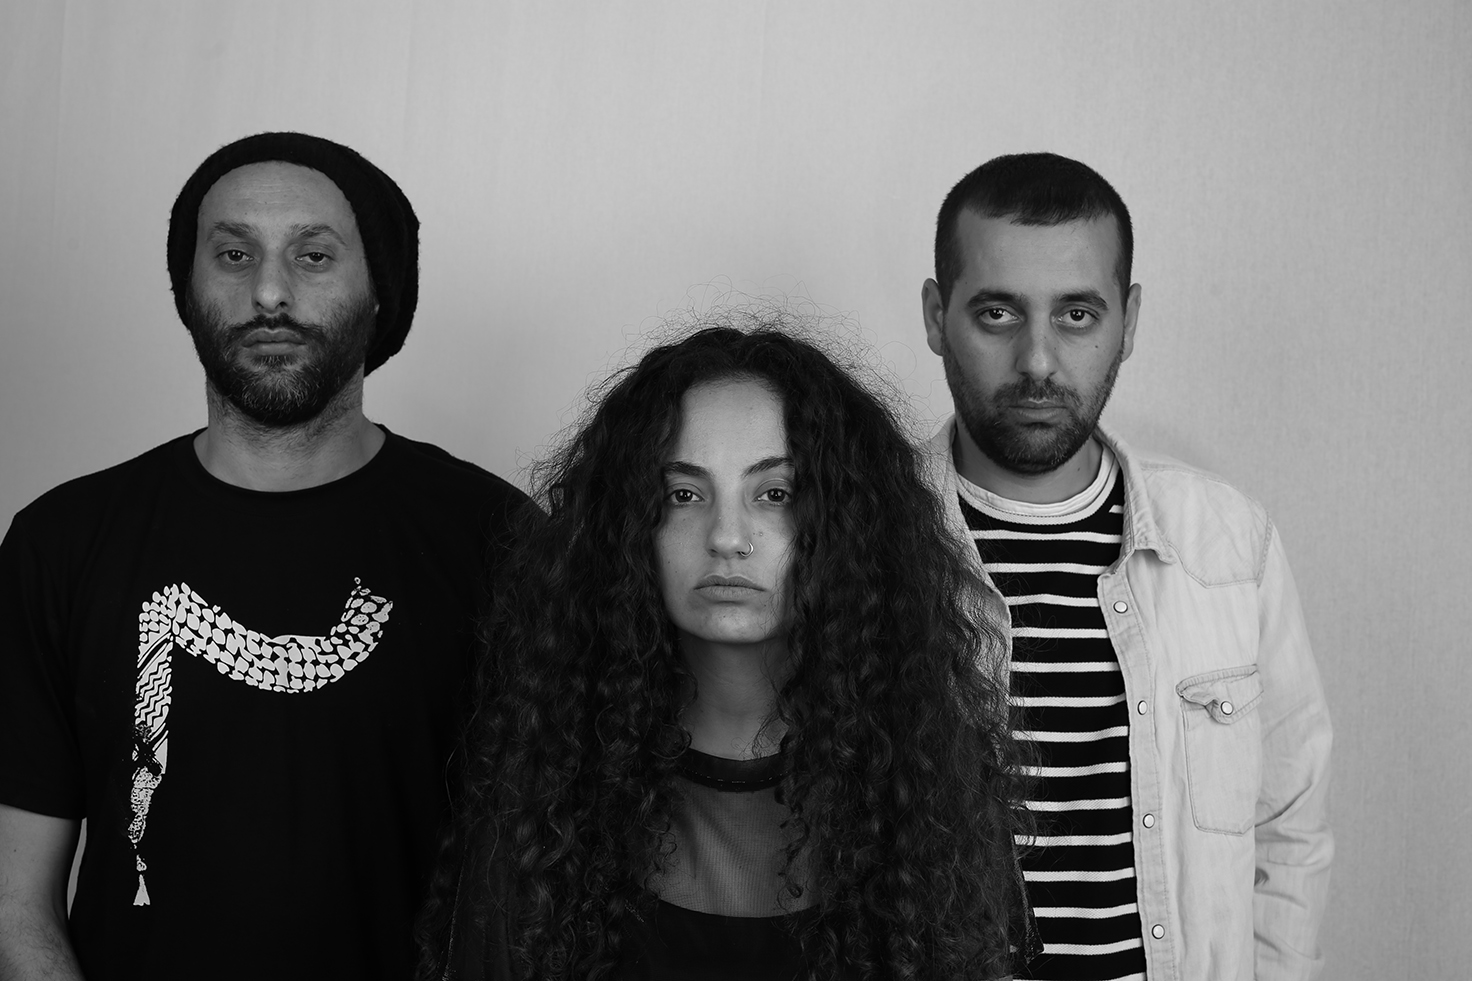 This Palestinian hip hop group s new record is a feminist rallying cry